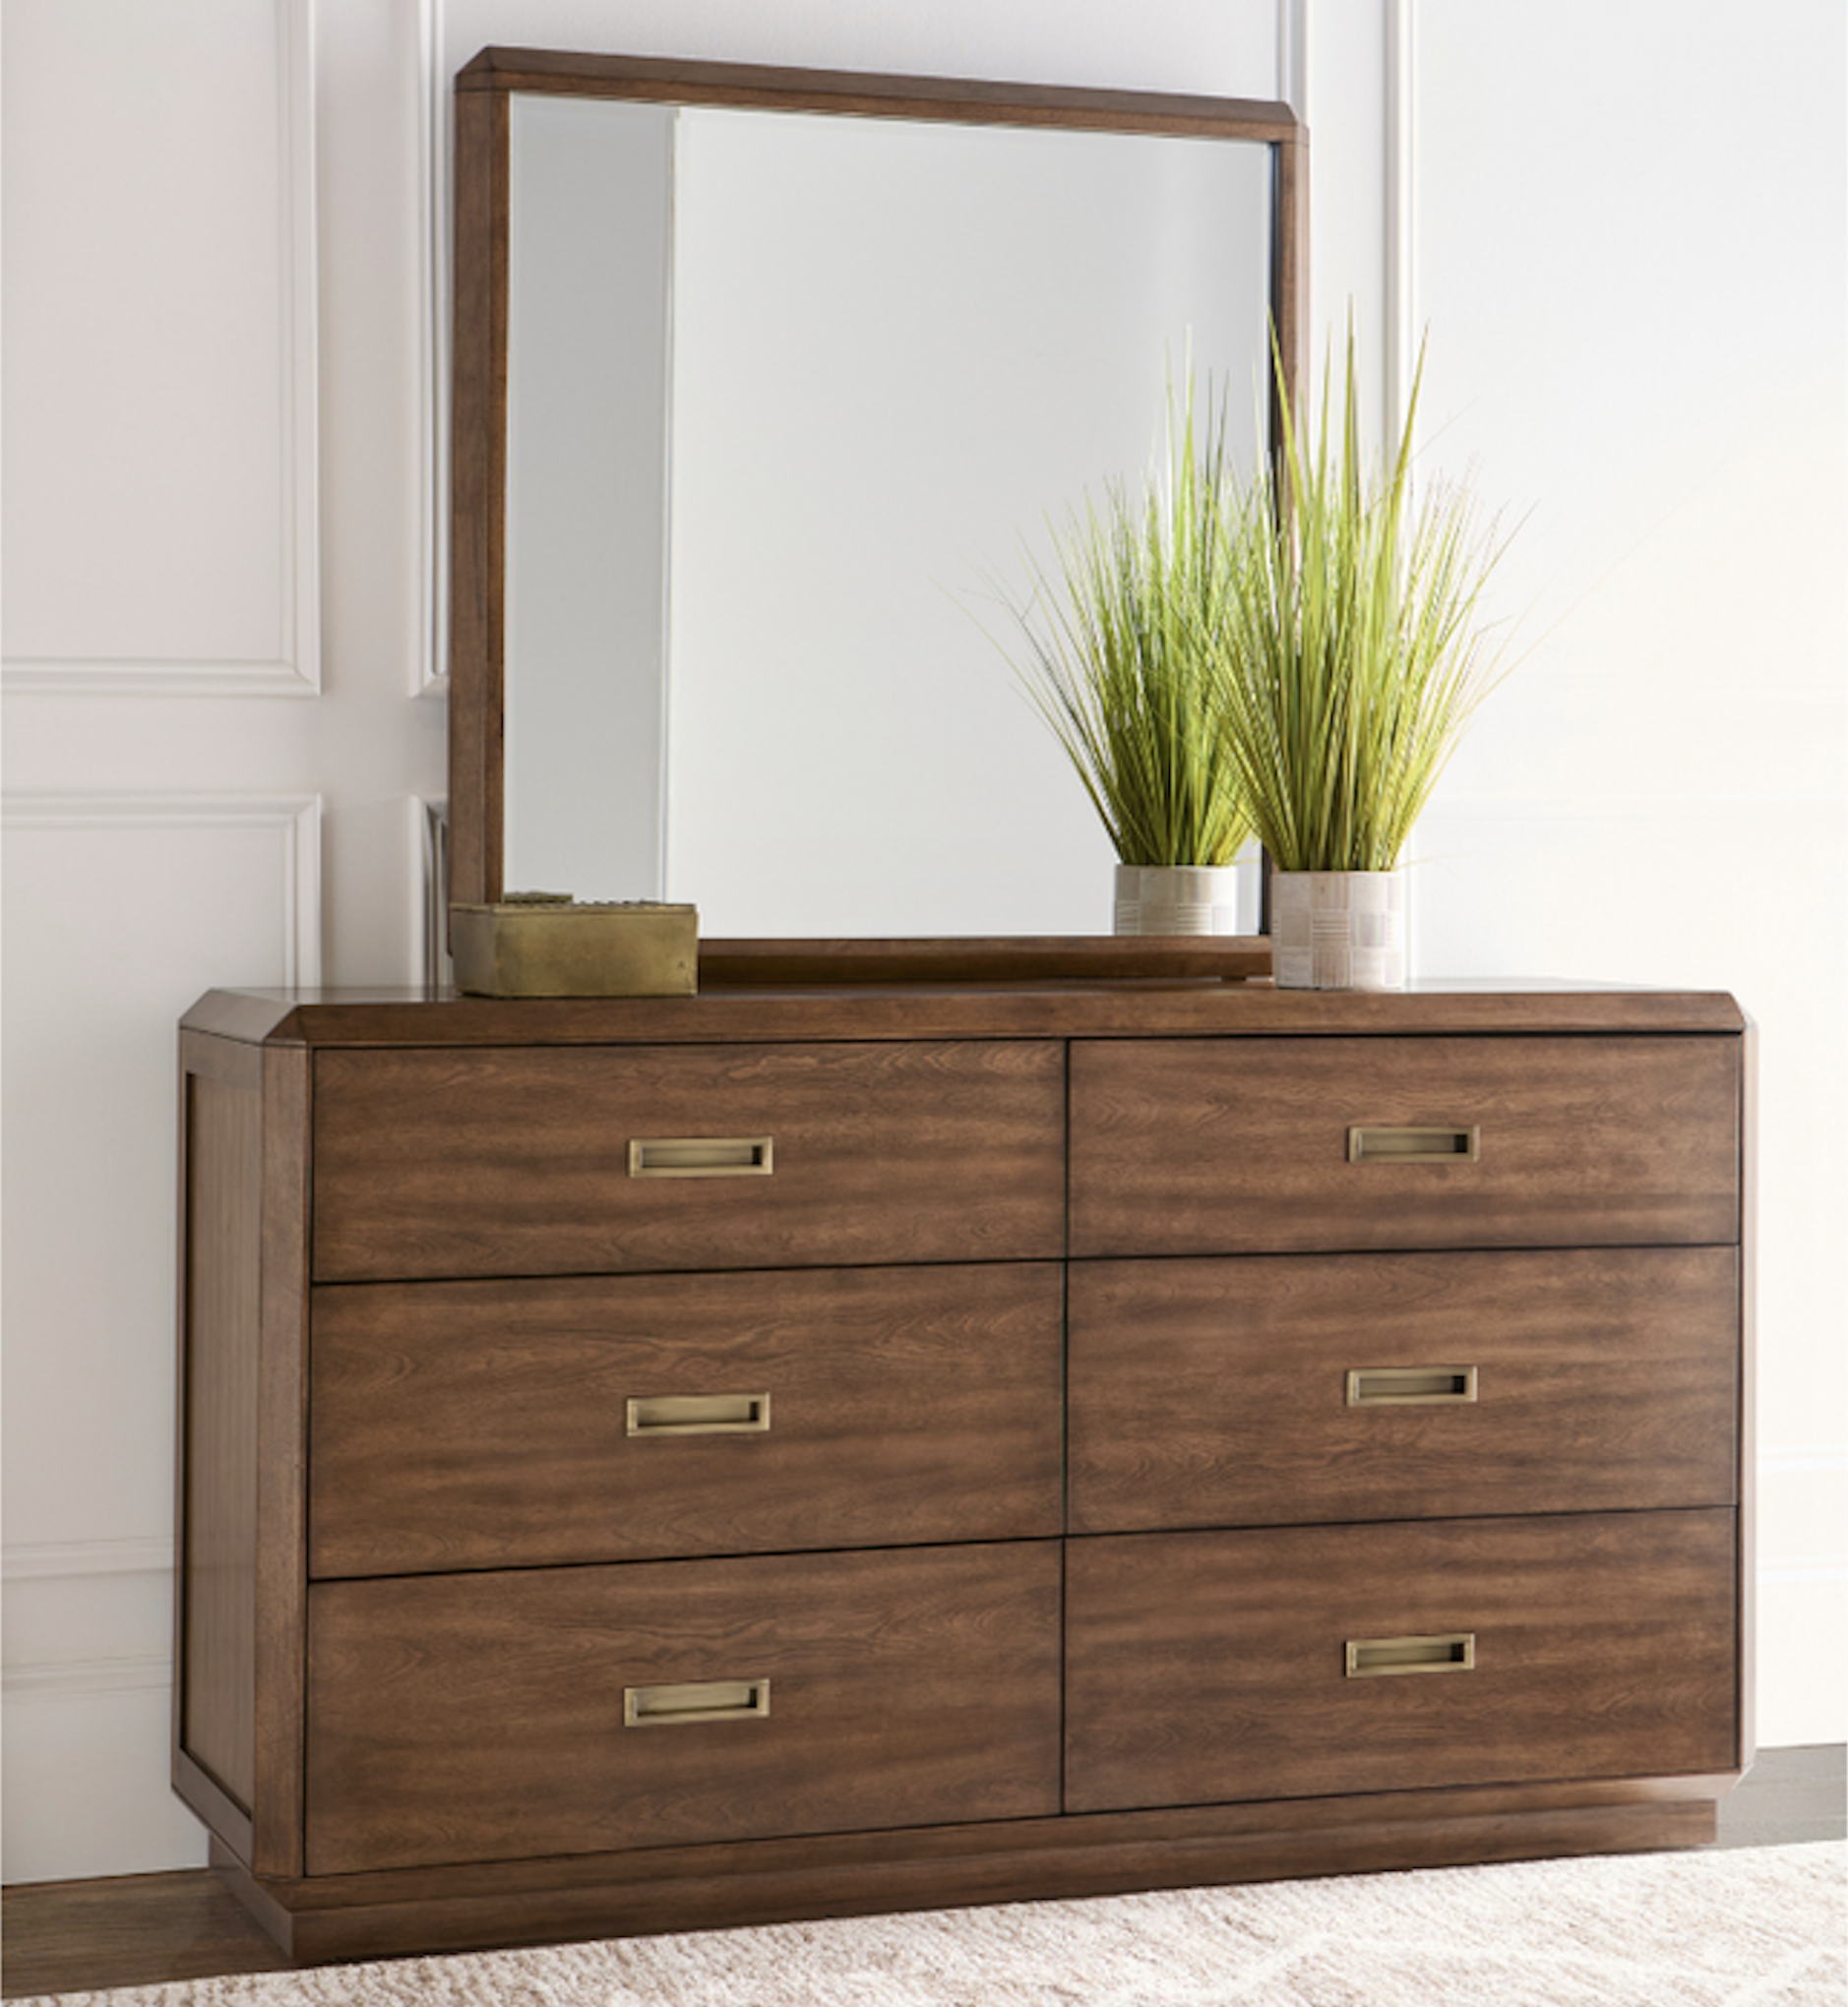 Acacia Wood Dresser With Mirror and Bronze Inlay Hardware